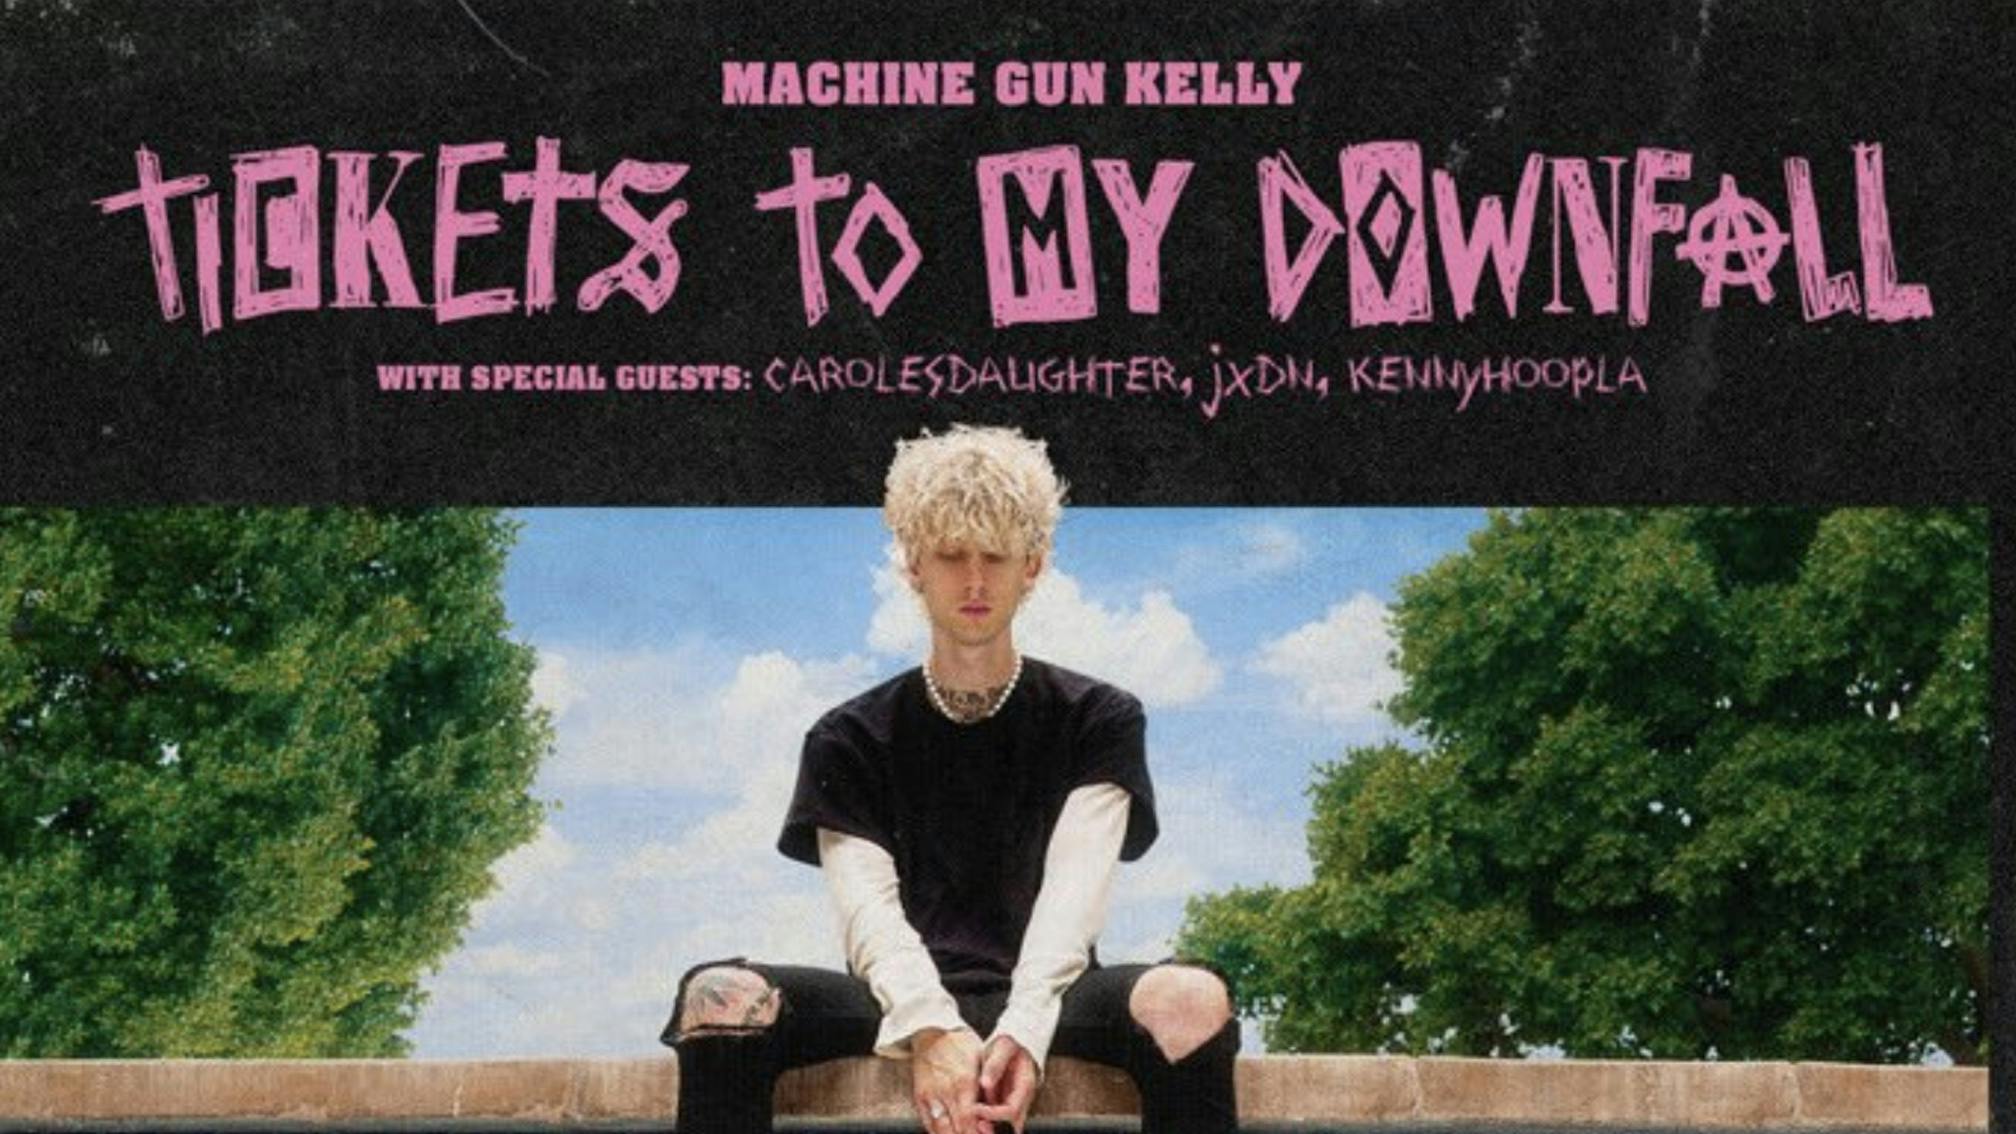 Machine Gun Kelly announces huge Tickets To My Downfall tour